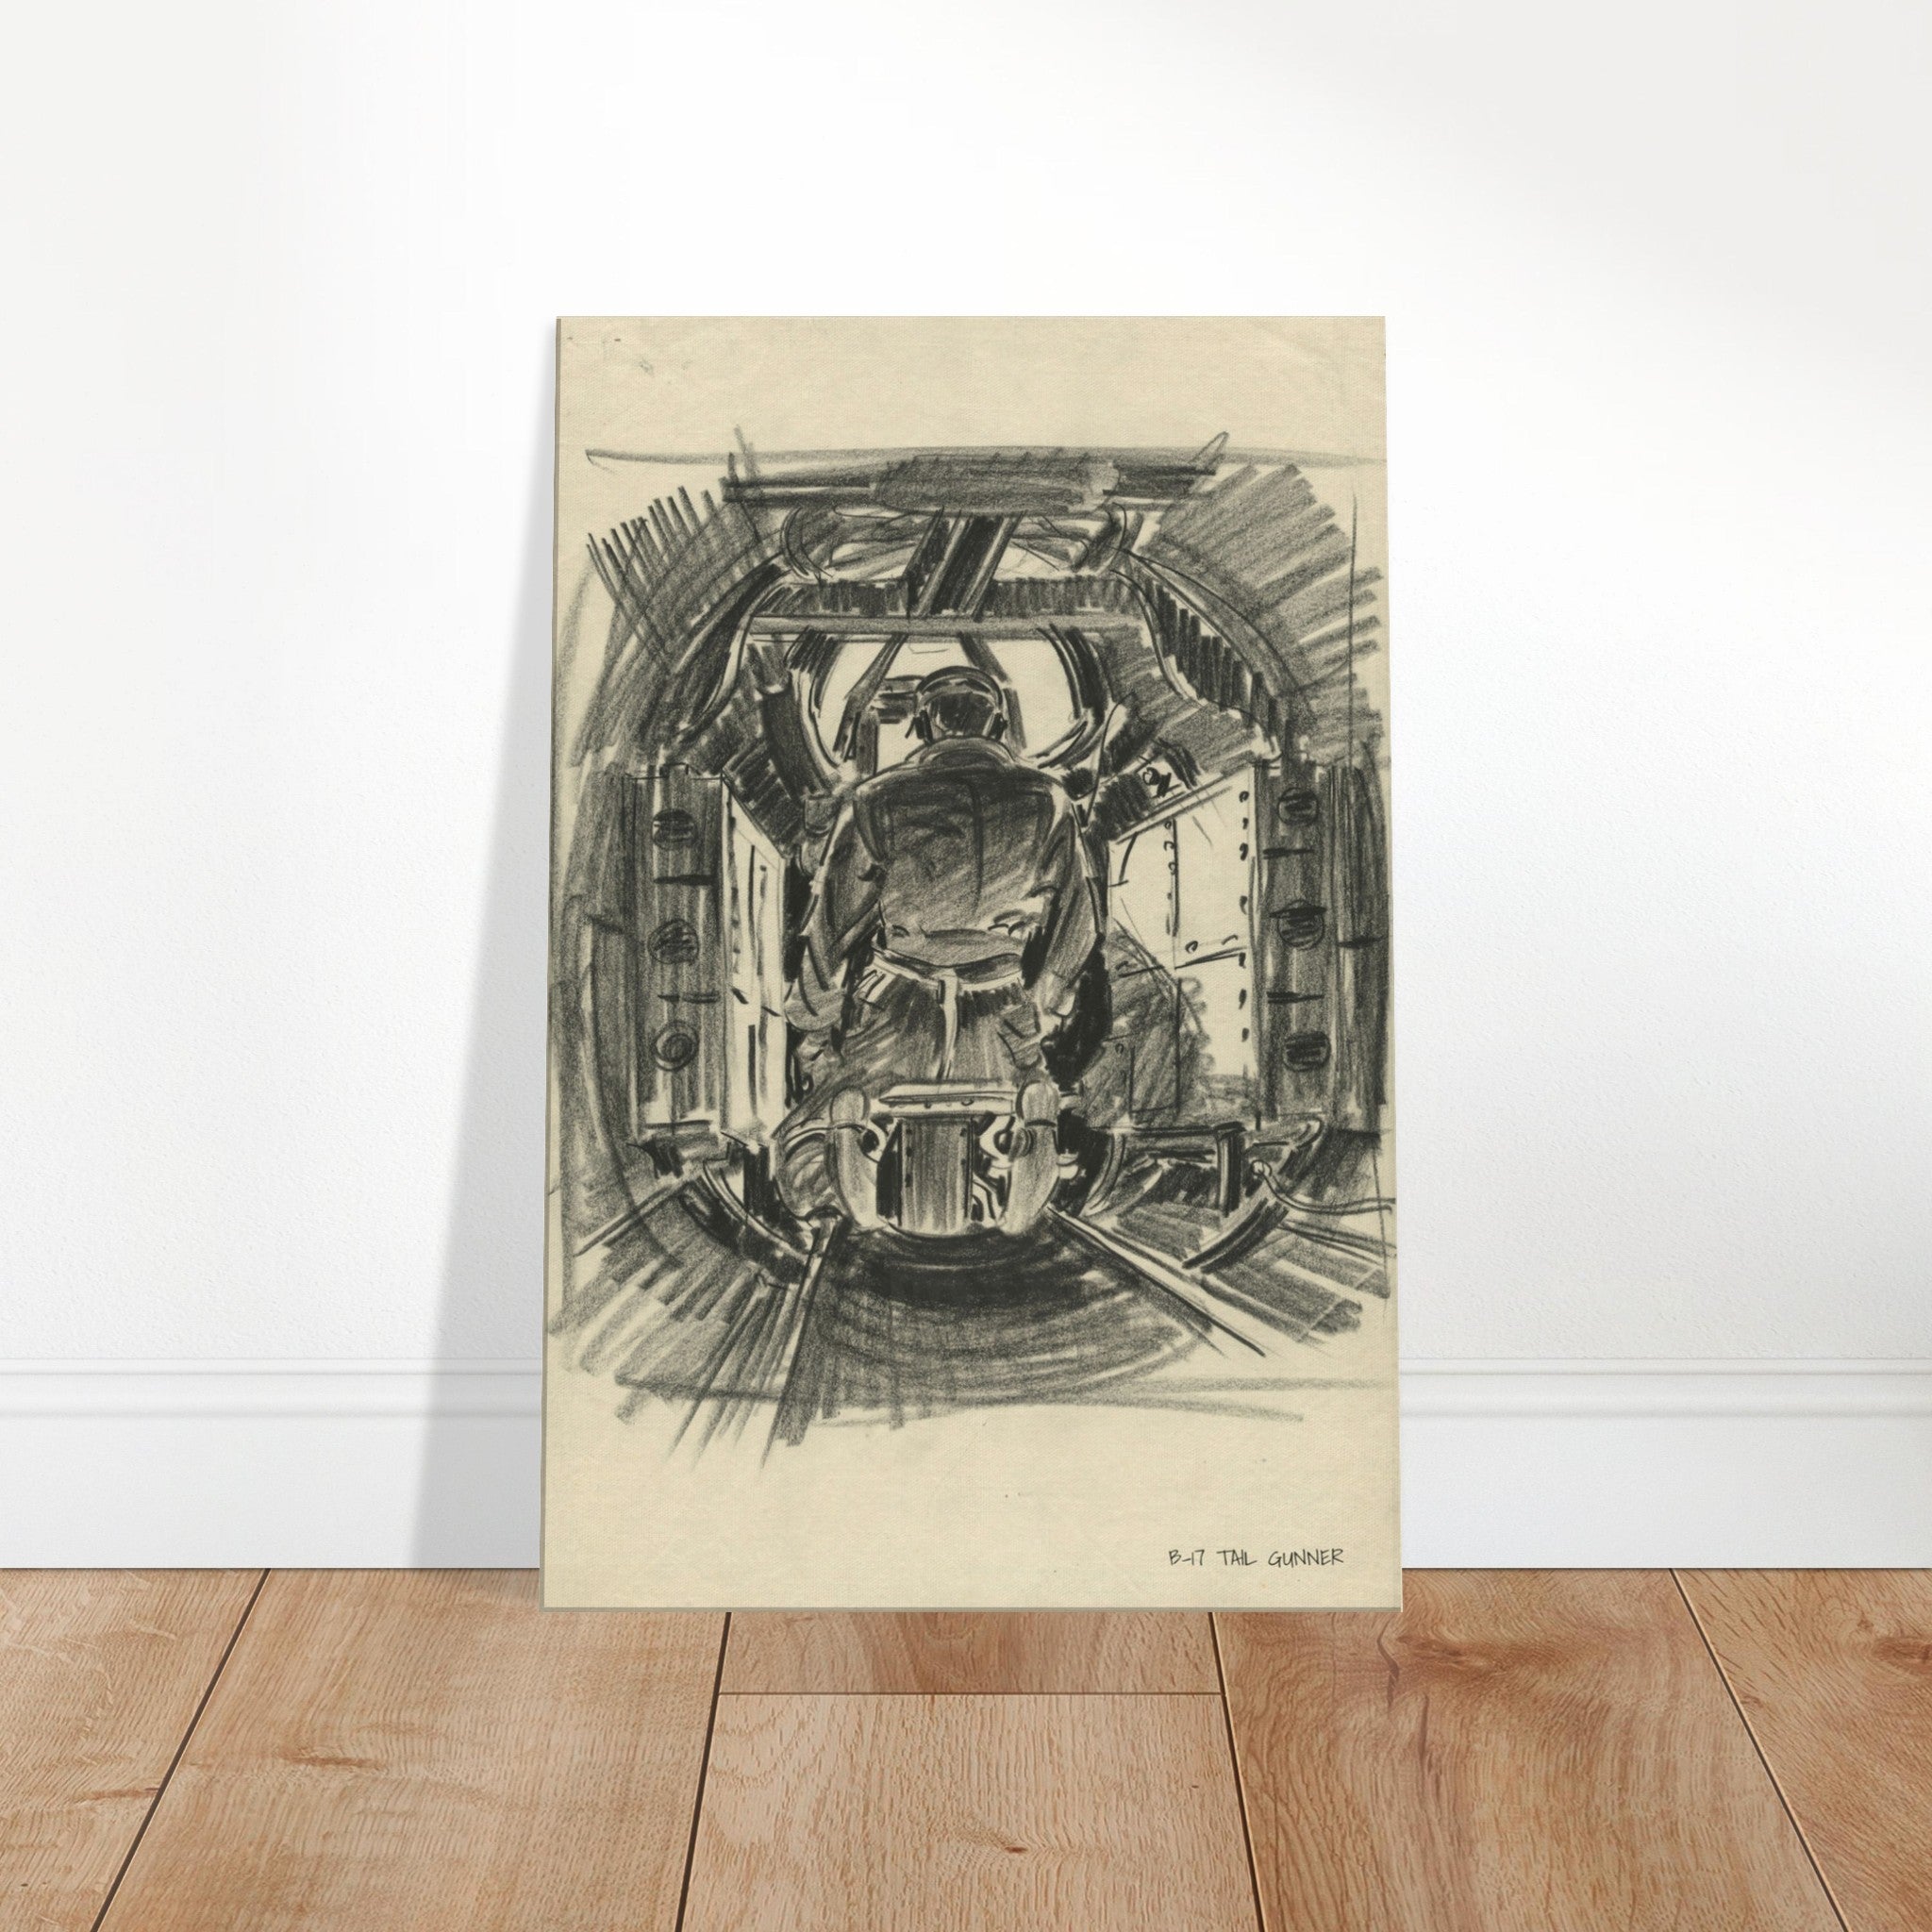 B-17 "Tail Gunner " Reproduction Charcoal Sketch On Canvas - I Love a Hangar